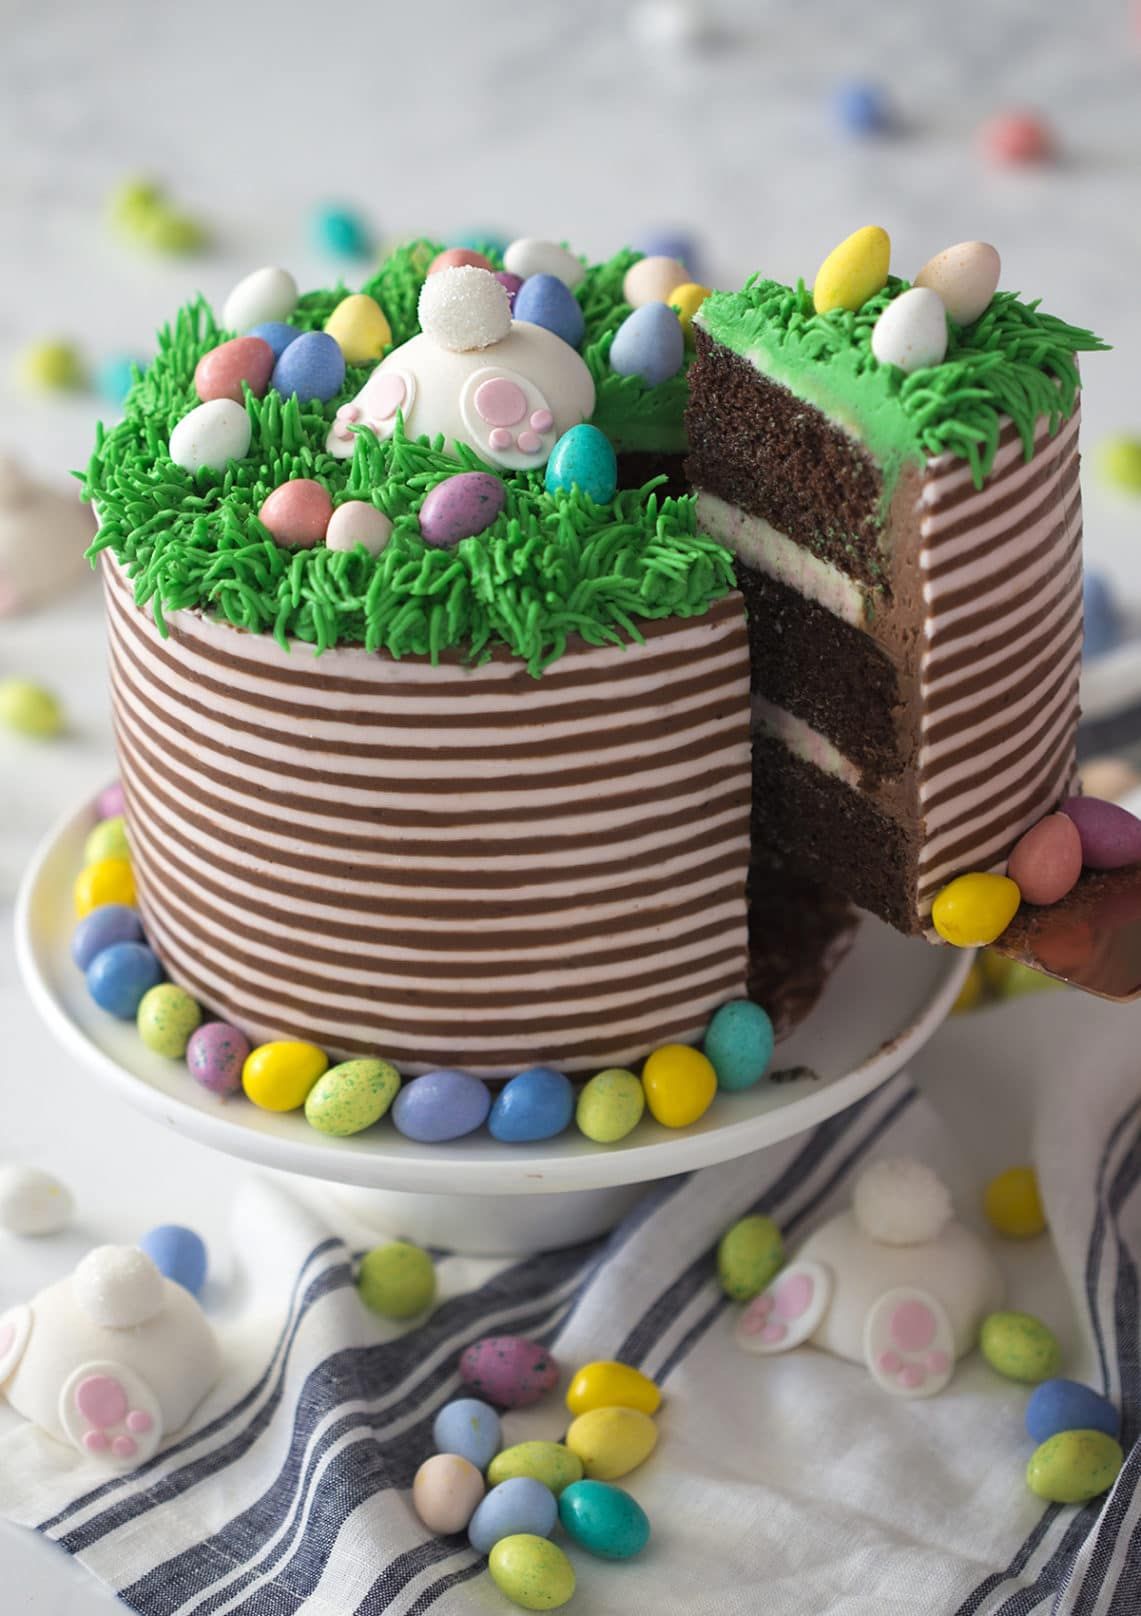 30+ Creative Easter Cake Ideas - Best Recipes For Easter Cakes